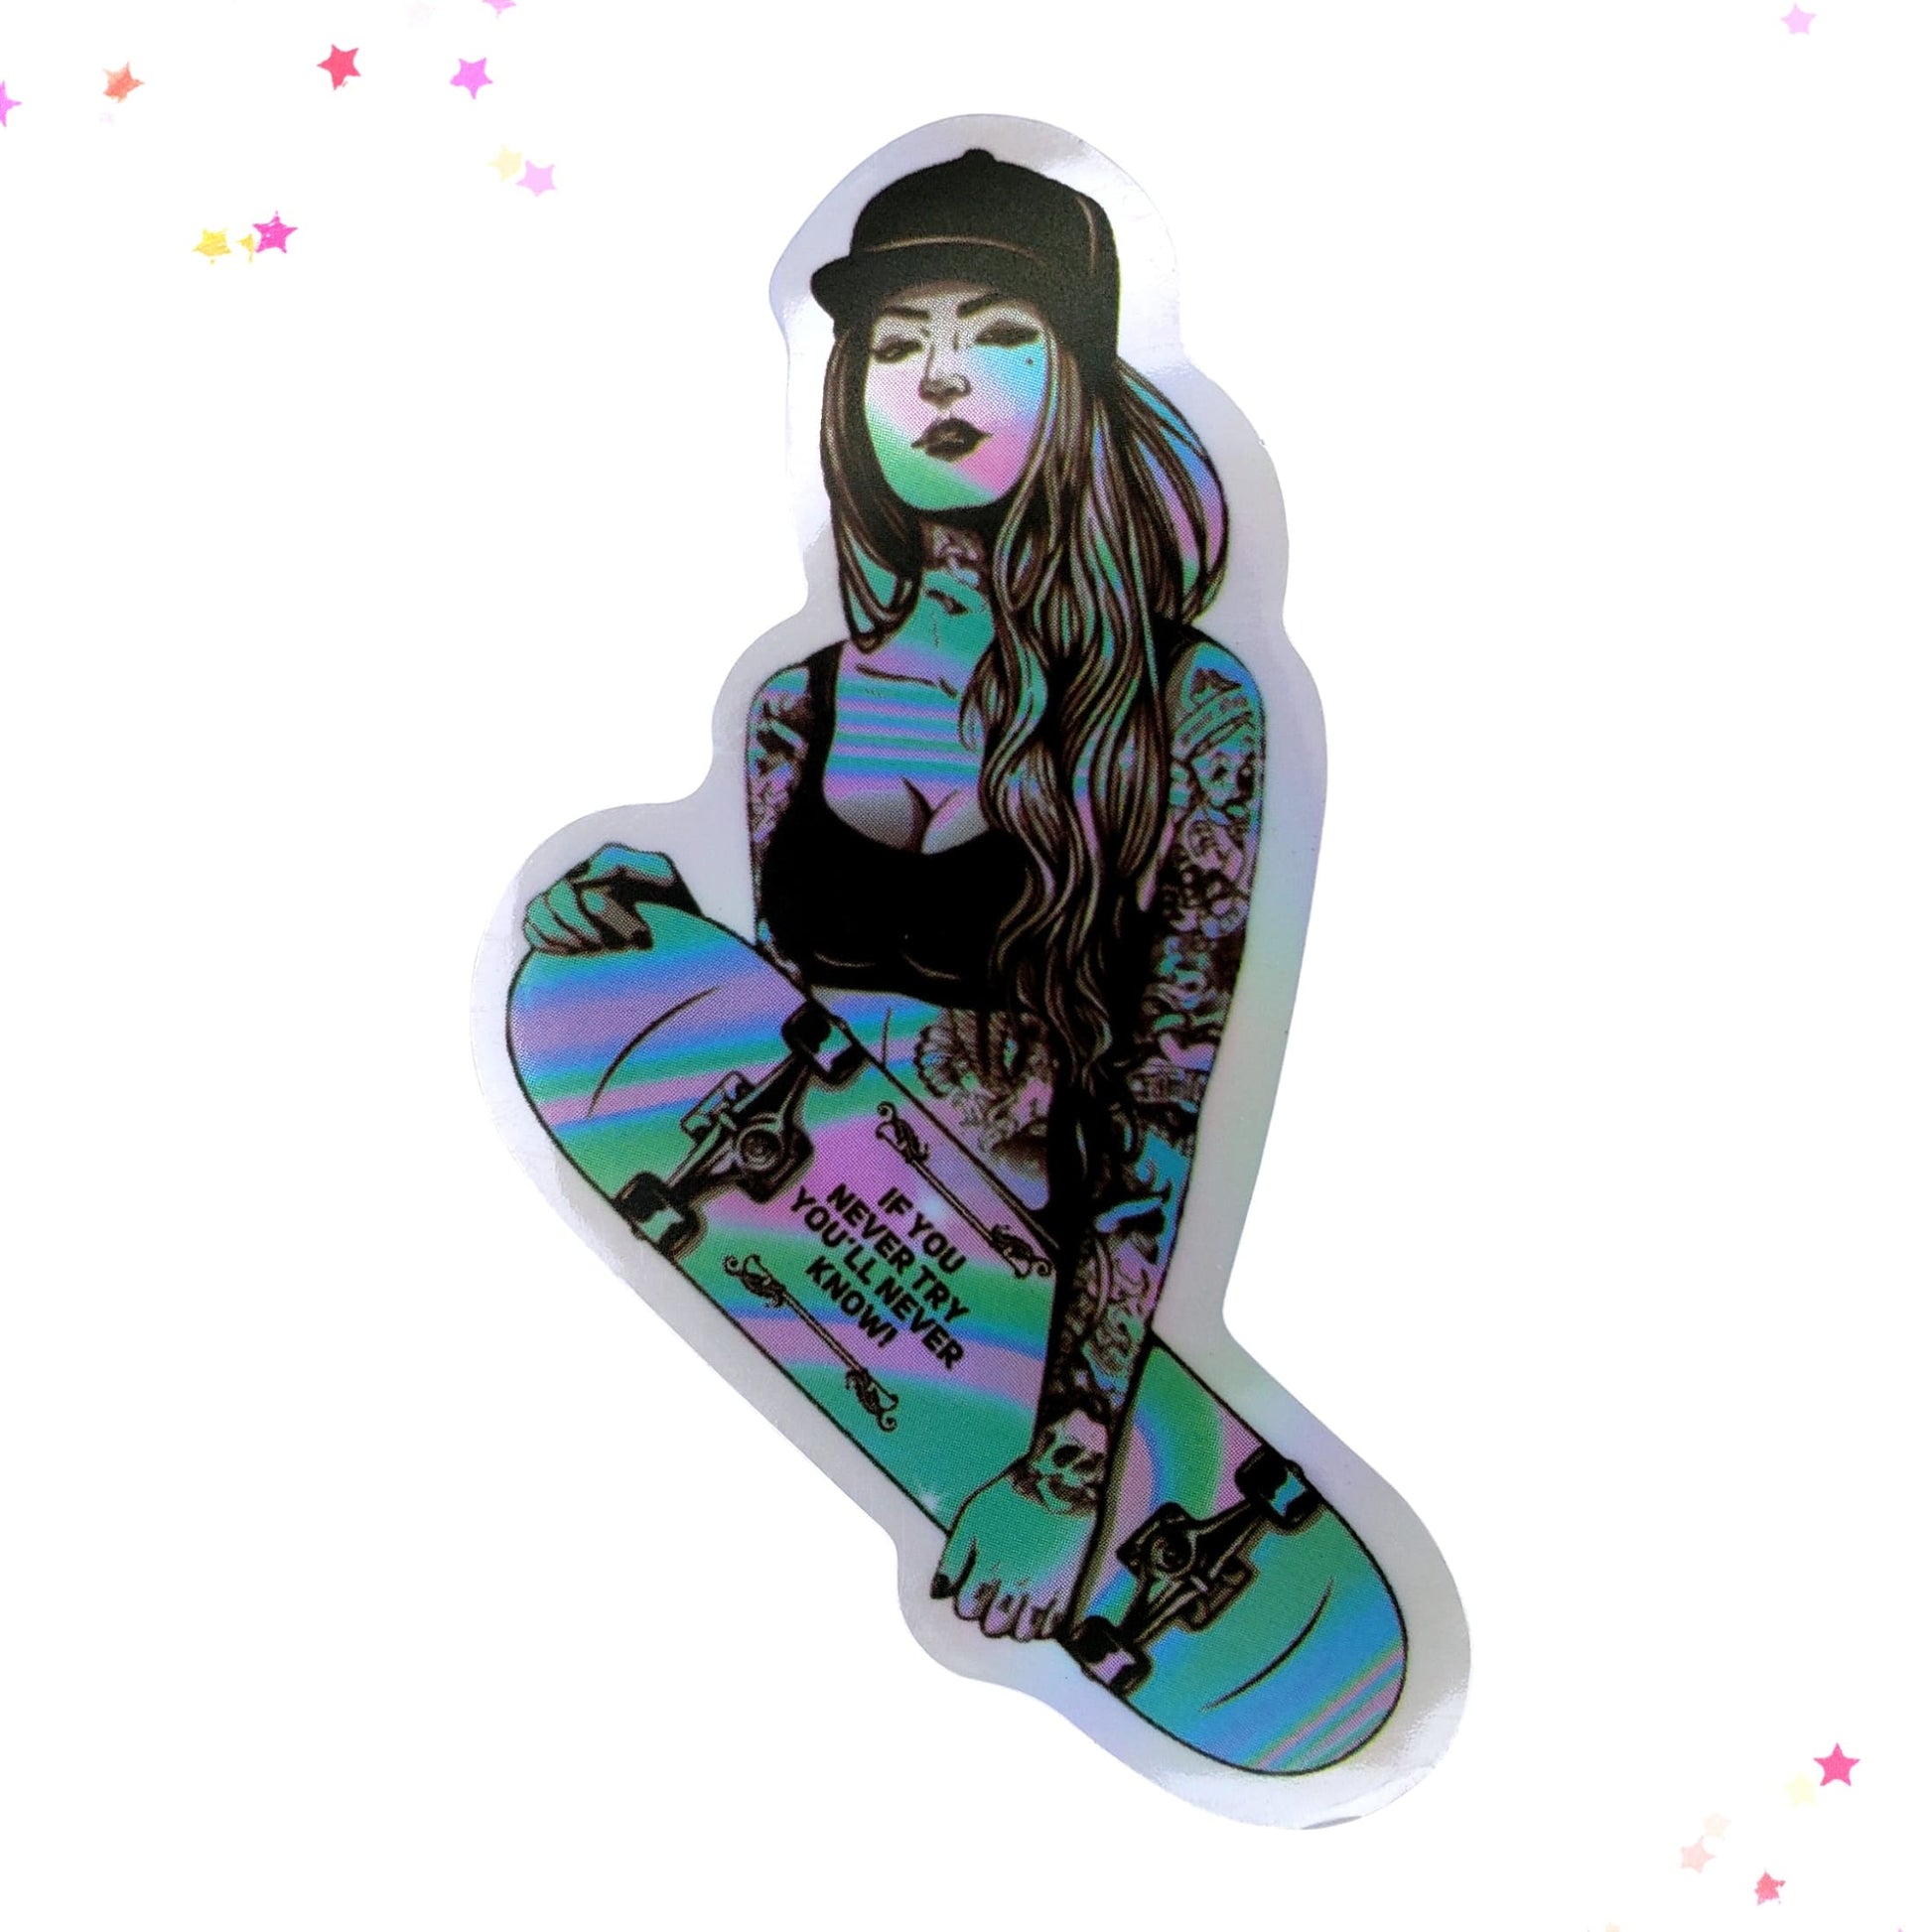 If You Never Try You'll Never Know Skater Girl Waterproof Holographic Sticker from Confetti Kitty, Only 1.0